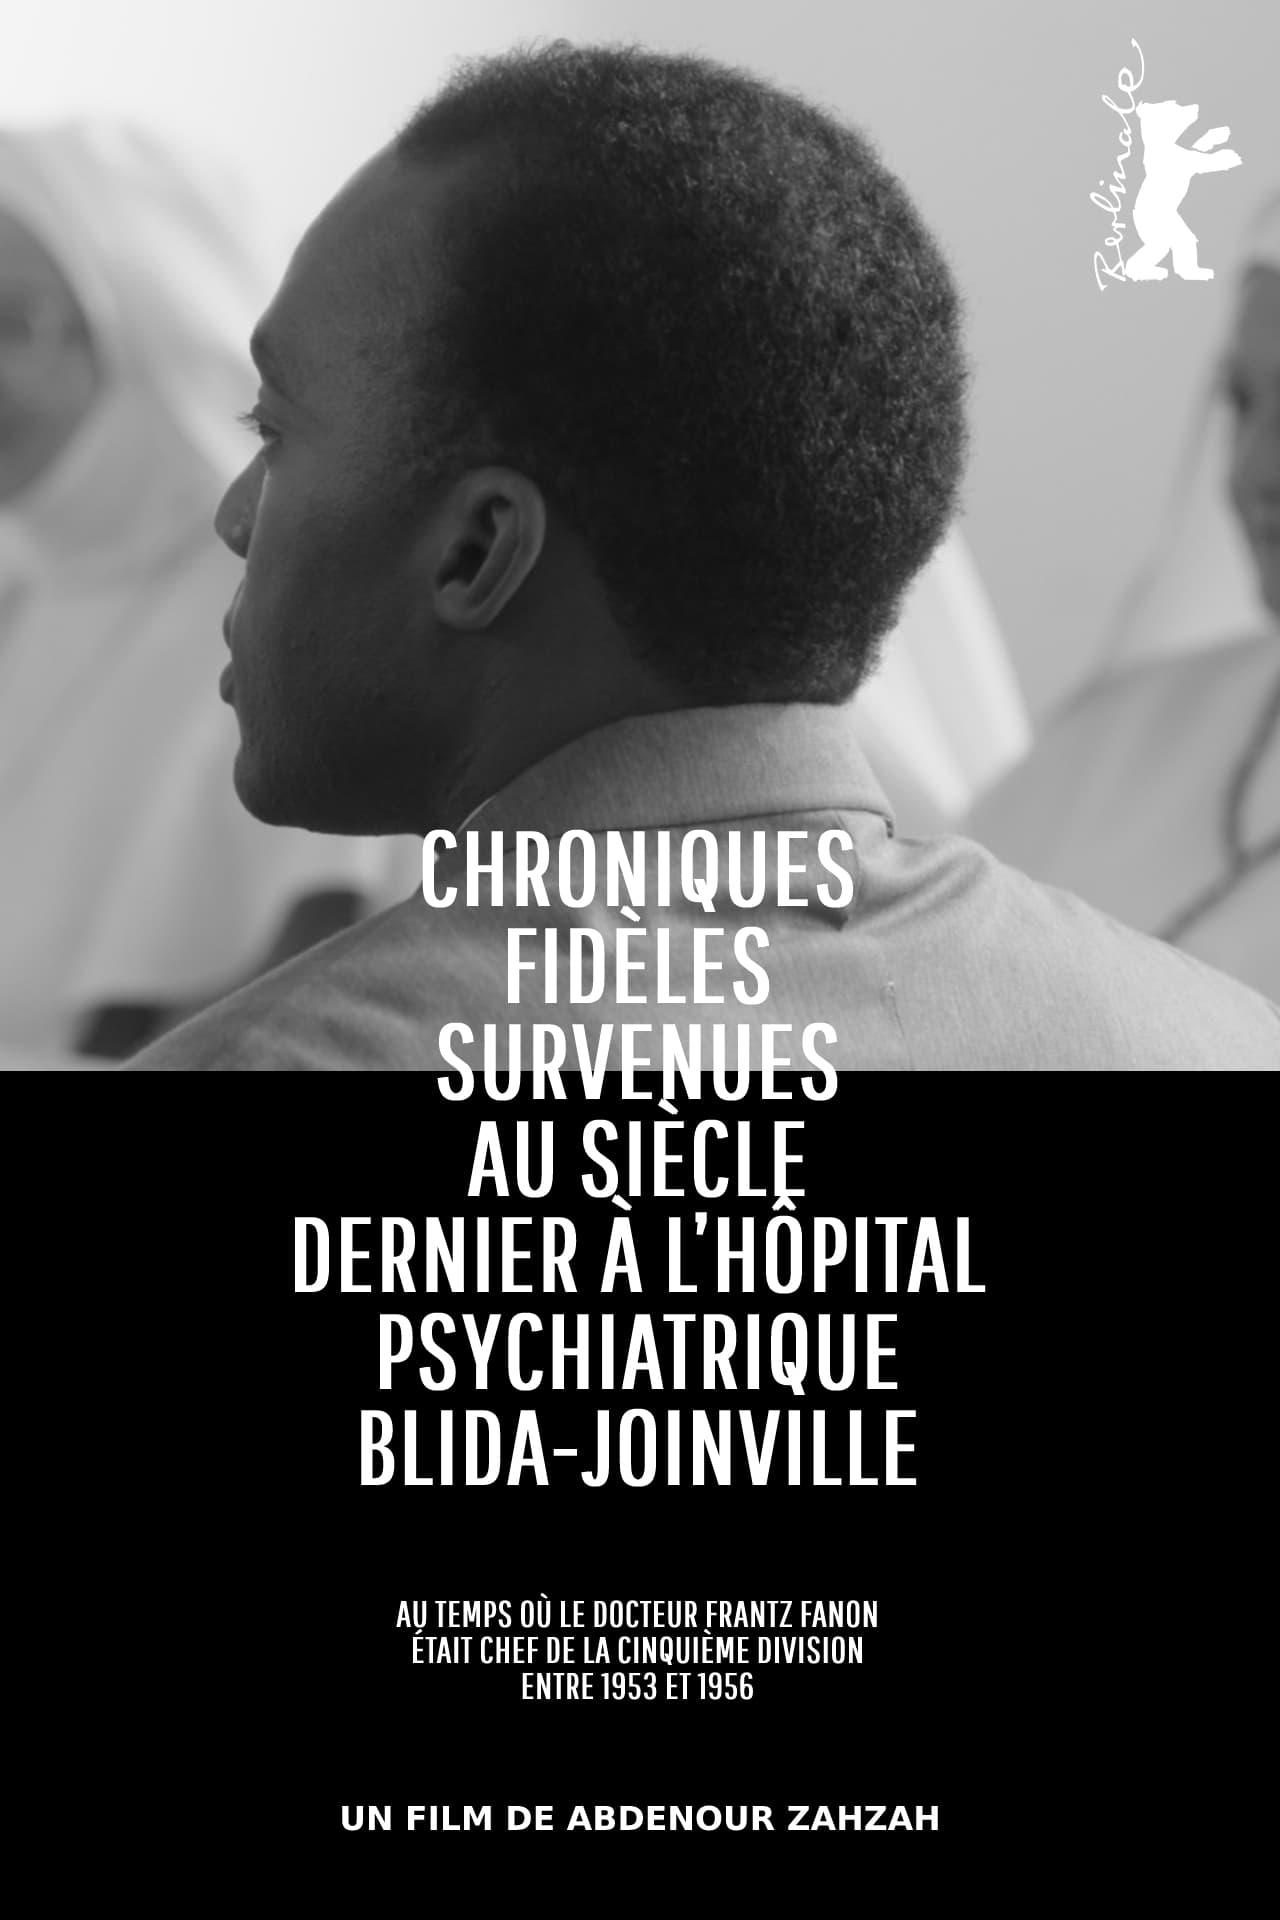 True Chronicles of the Blida Joinville Psychiatric Hospital in the Last Century, when Dr Frantz Fanon Was Head of the Fifth Ward between 1953 and 1956